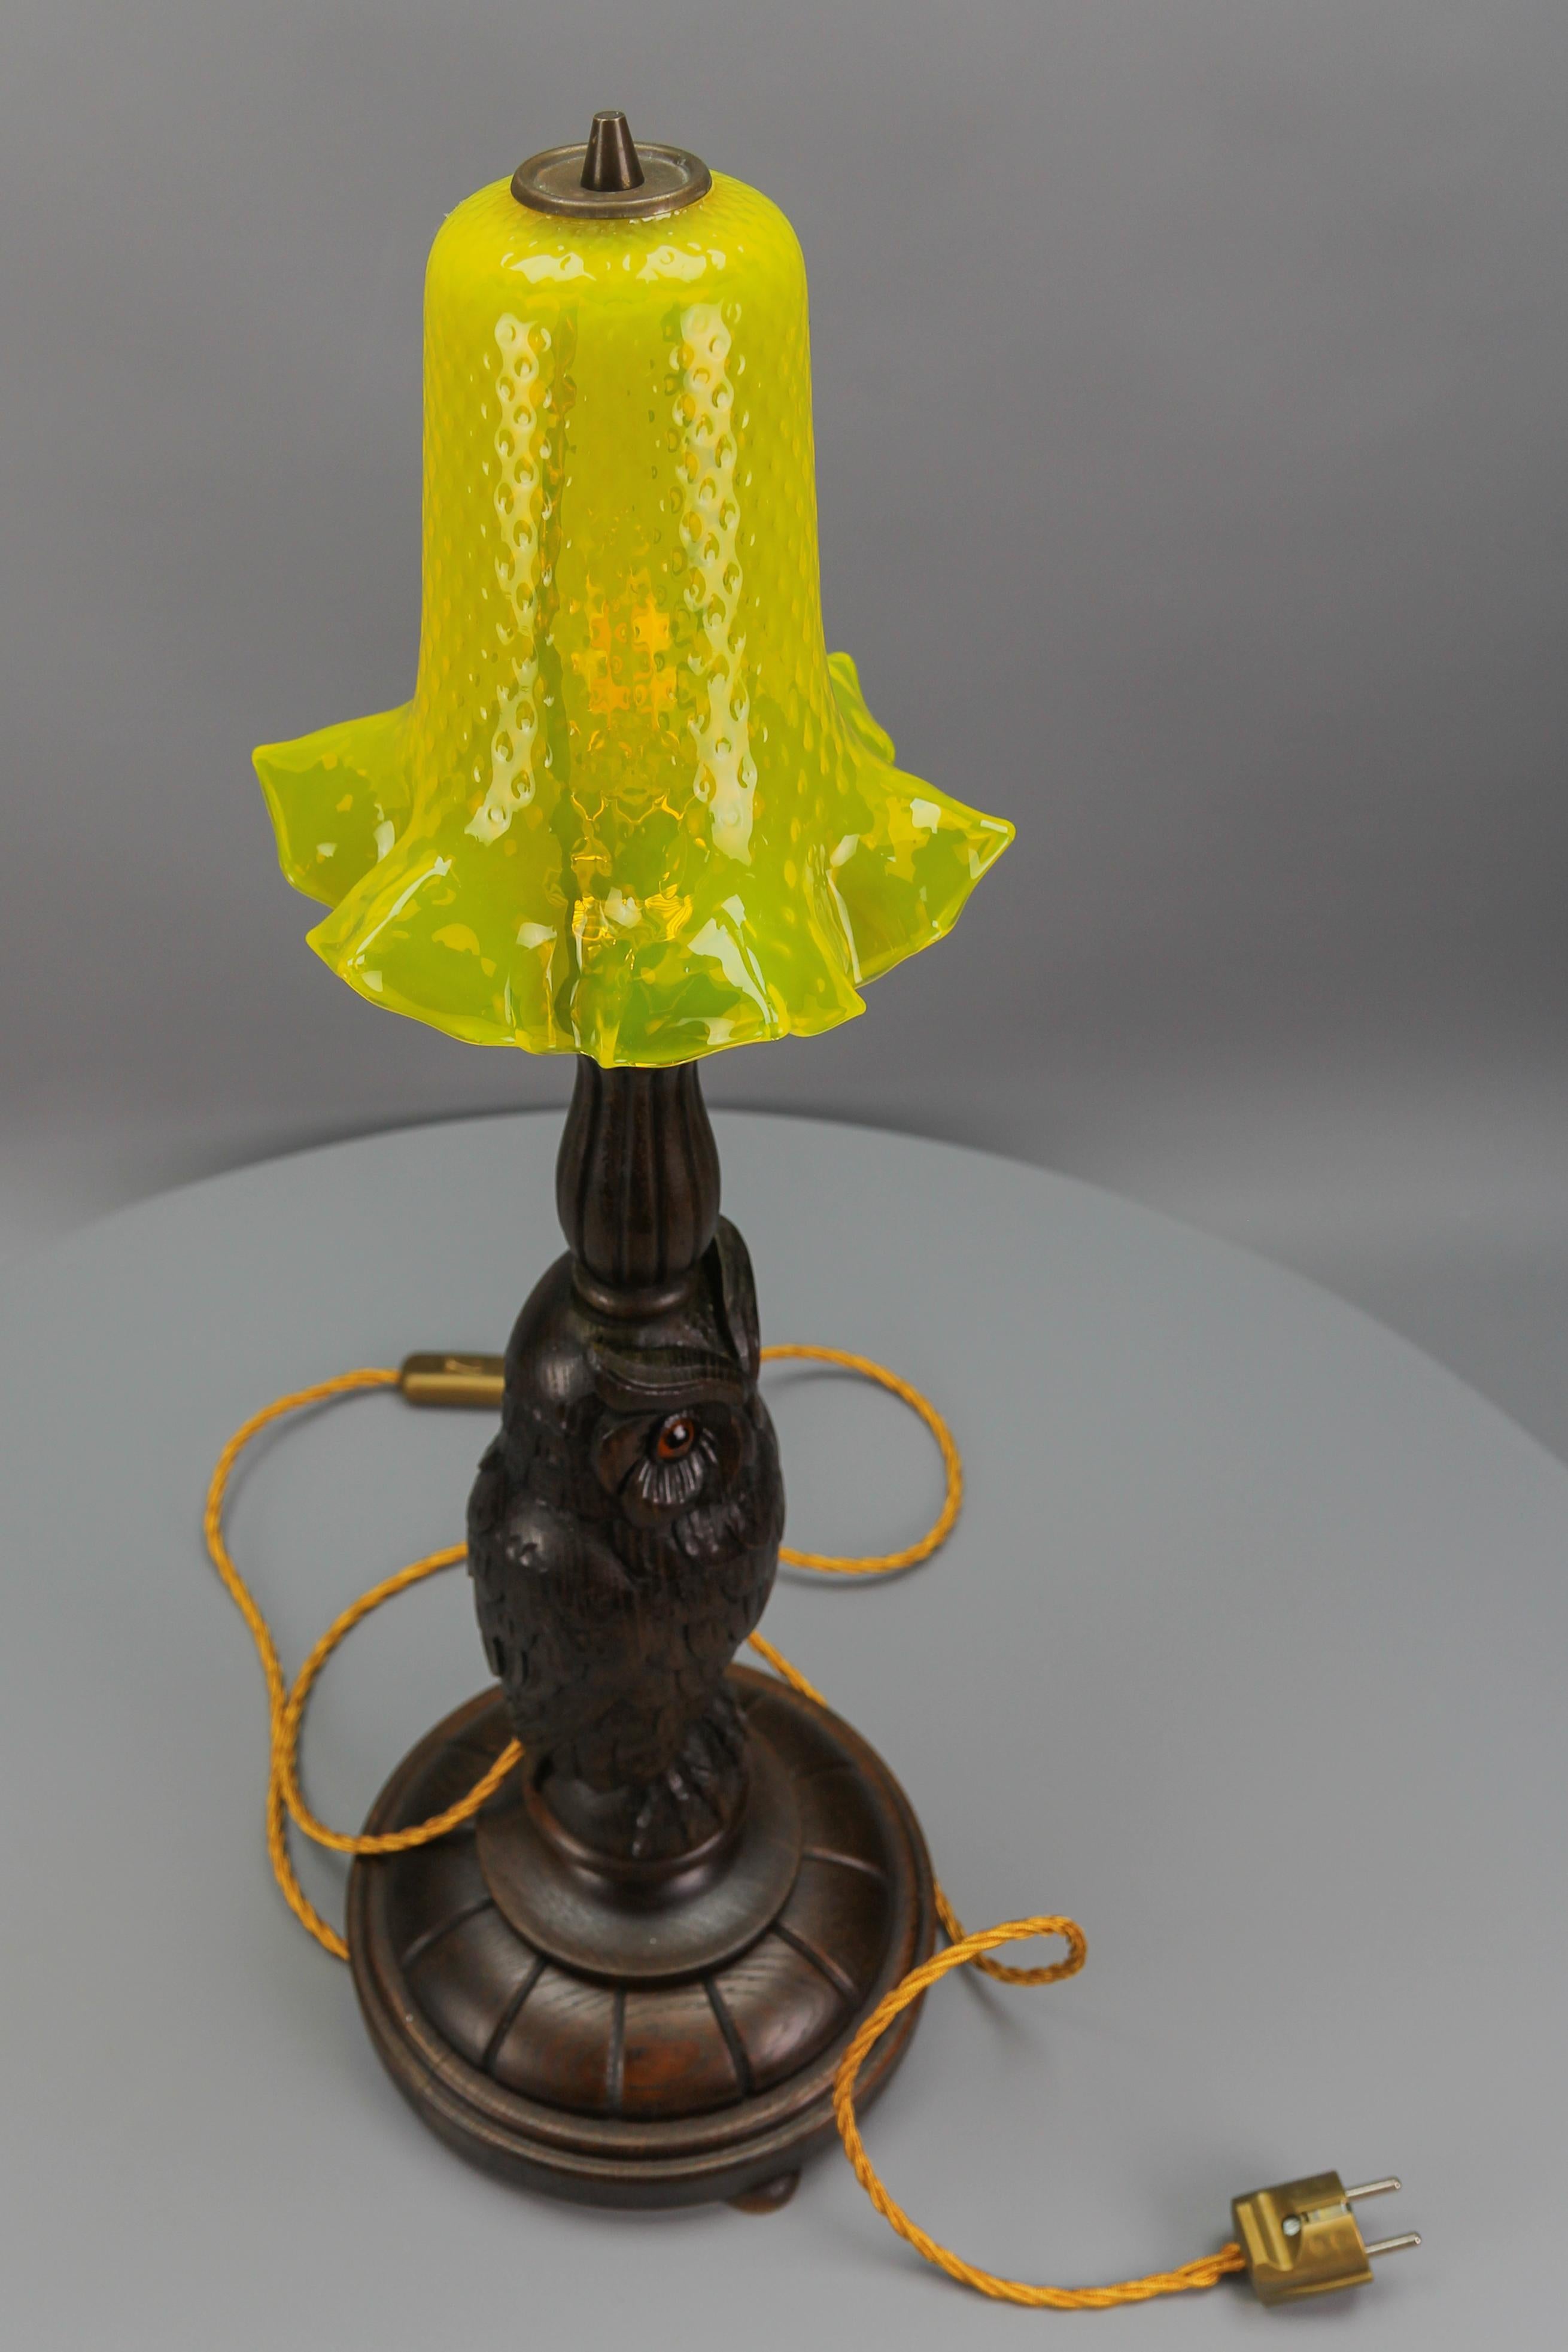 Art Deco Table Lamp with Owl Sculpture and Yellow Glass Lampshade, ca. 1920 For Sale 7